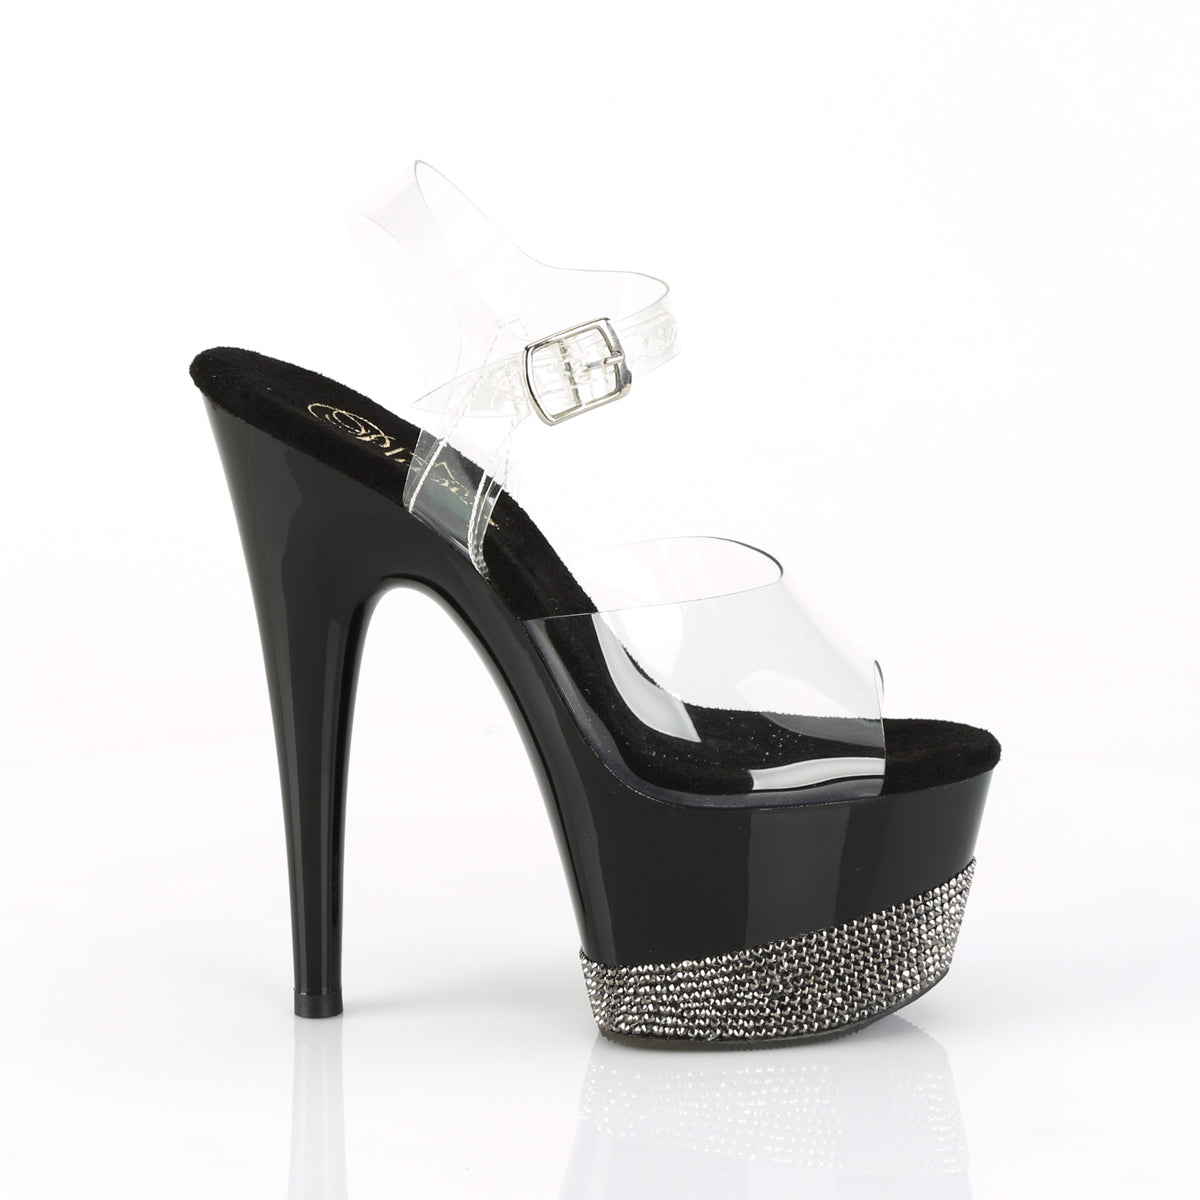 ADORE-708-3 Heels ClearBlack Pewter Bling Pole Dancing Shoes-Pleaser- Sexy Shoes Fetish Heels